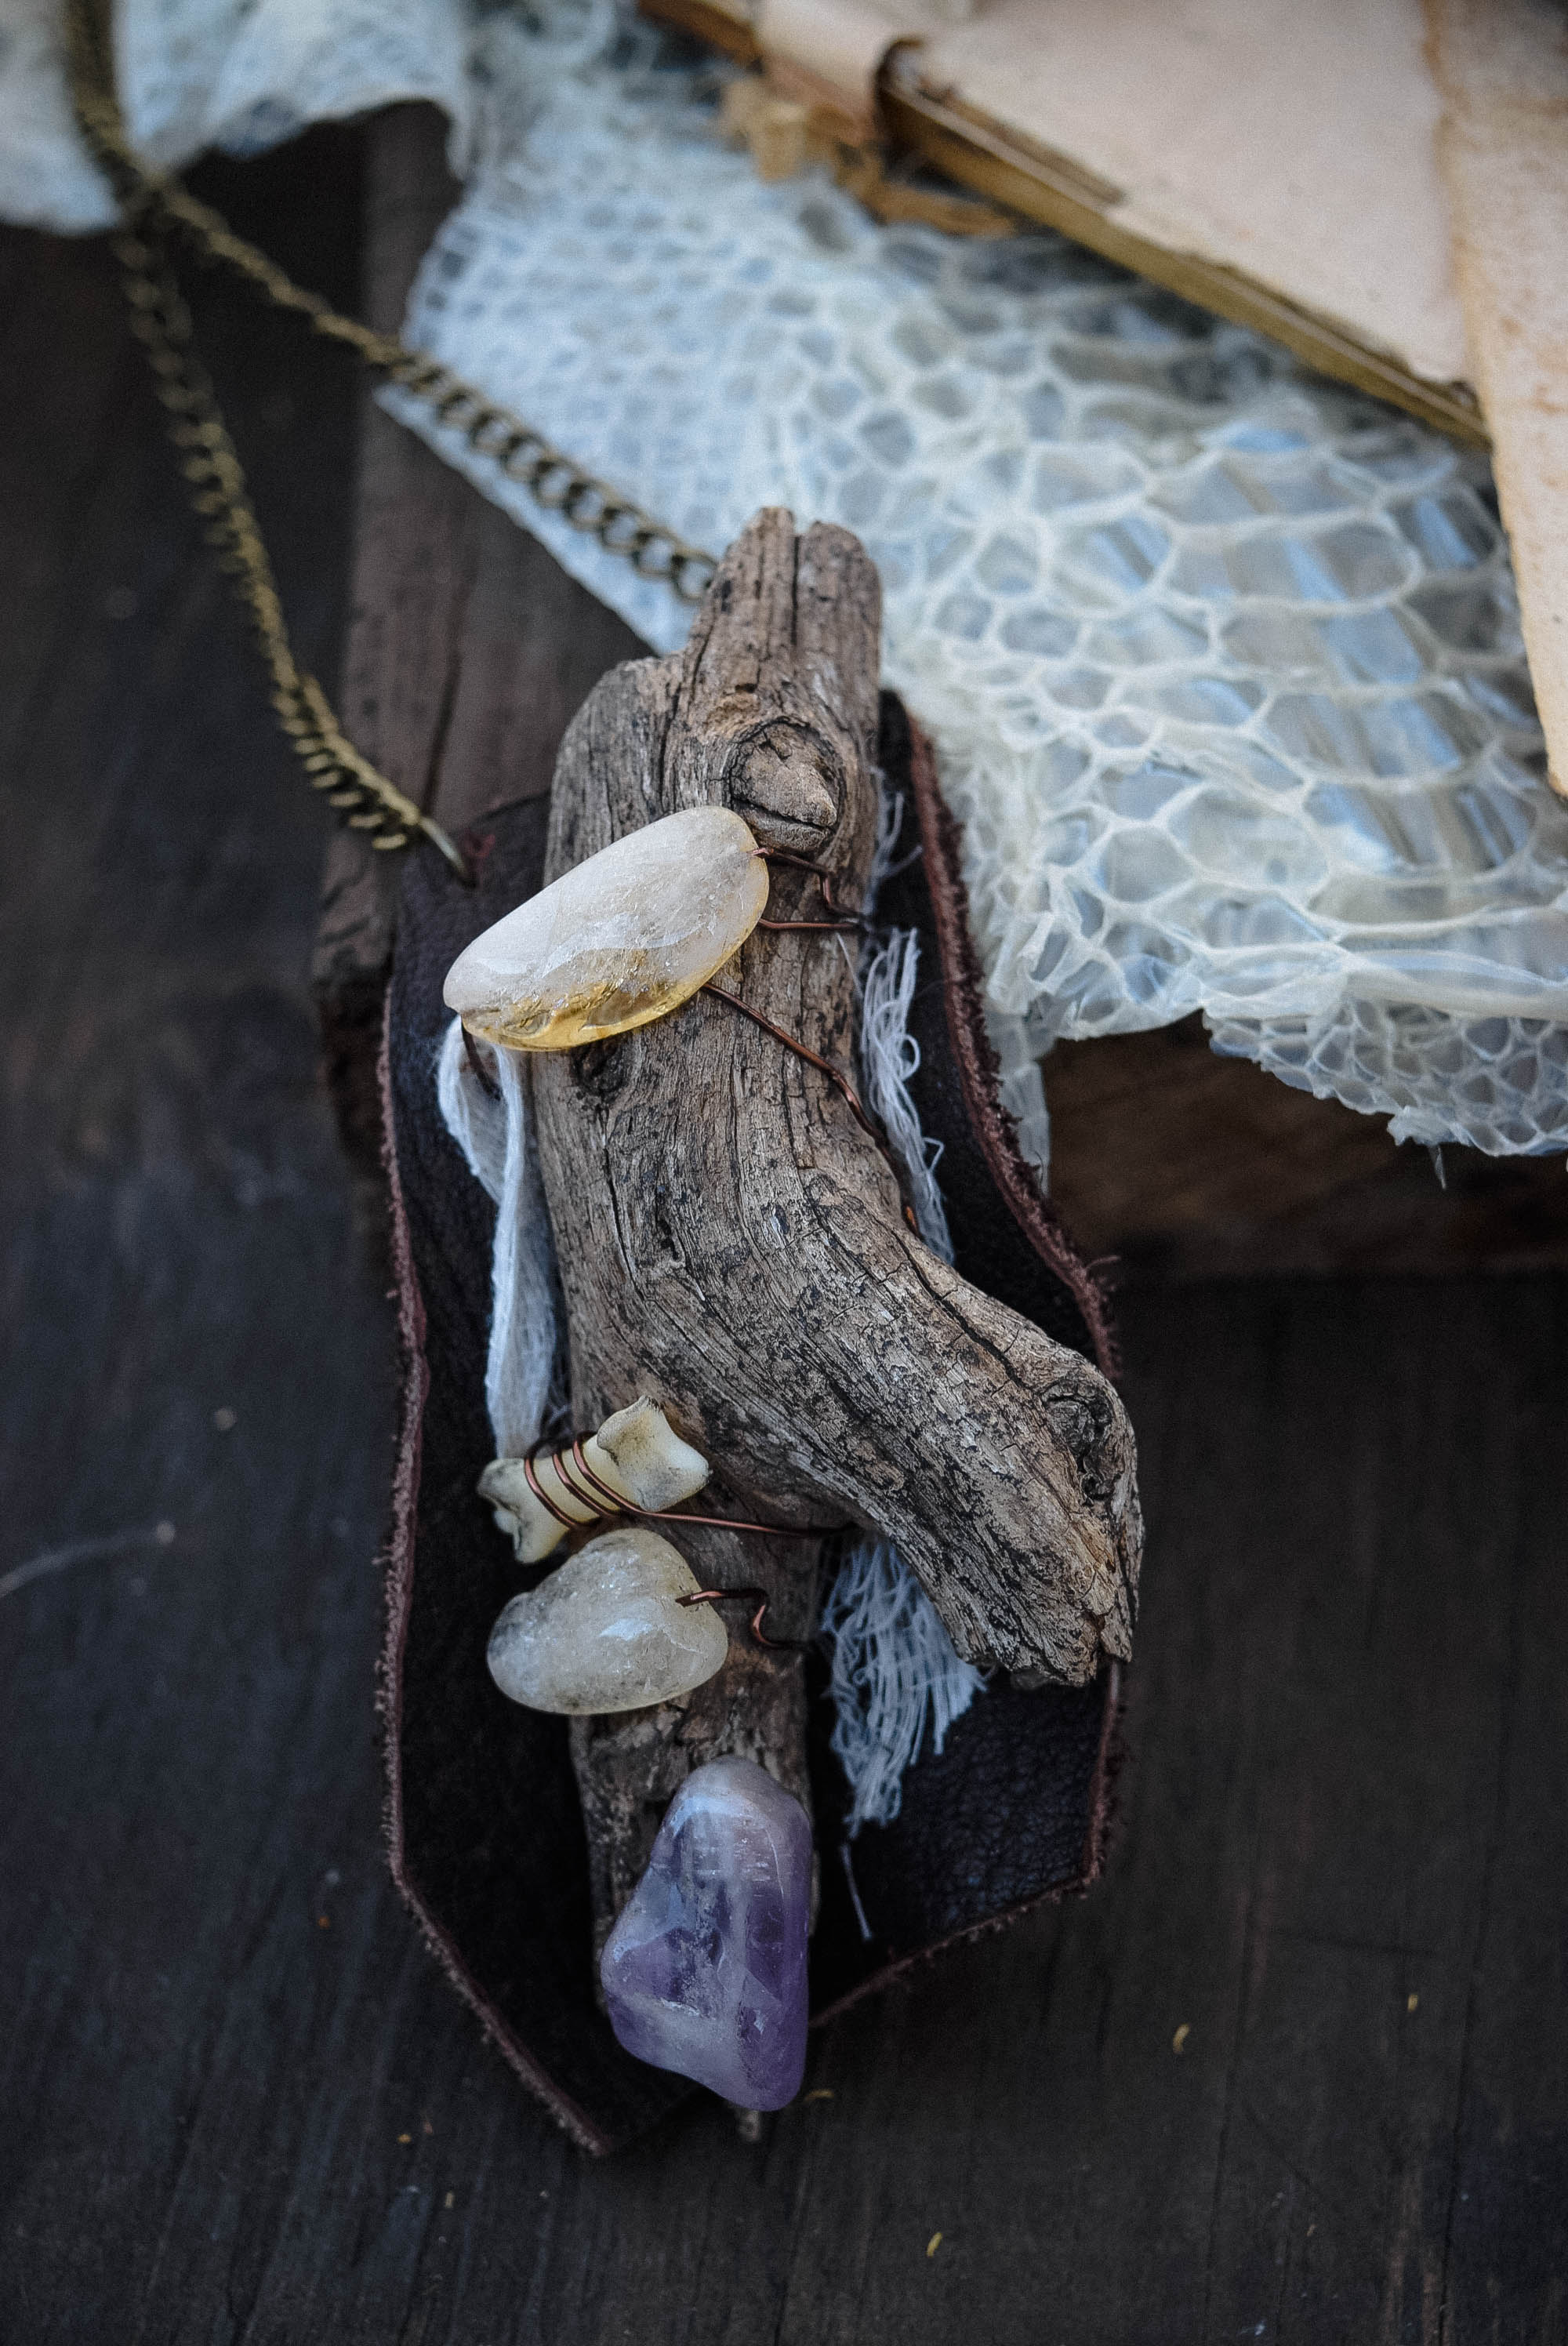 Wild One Necklace with Citrine, Amethyst and Bone for Spiritual Awareness, Creativity and Self Expression